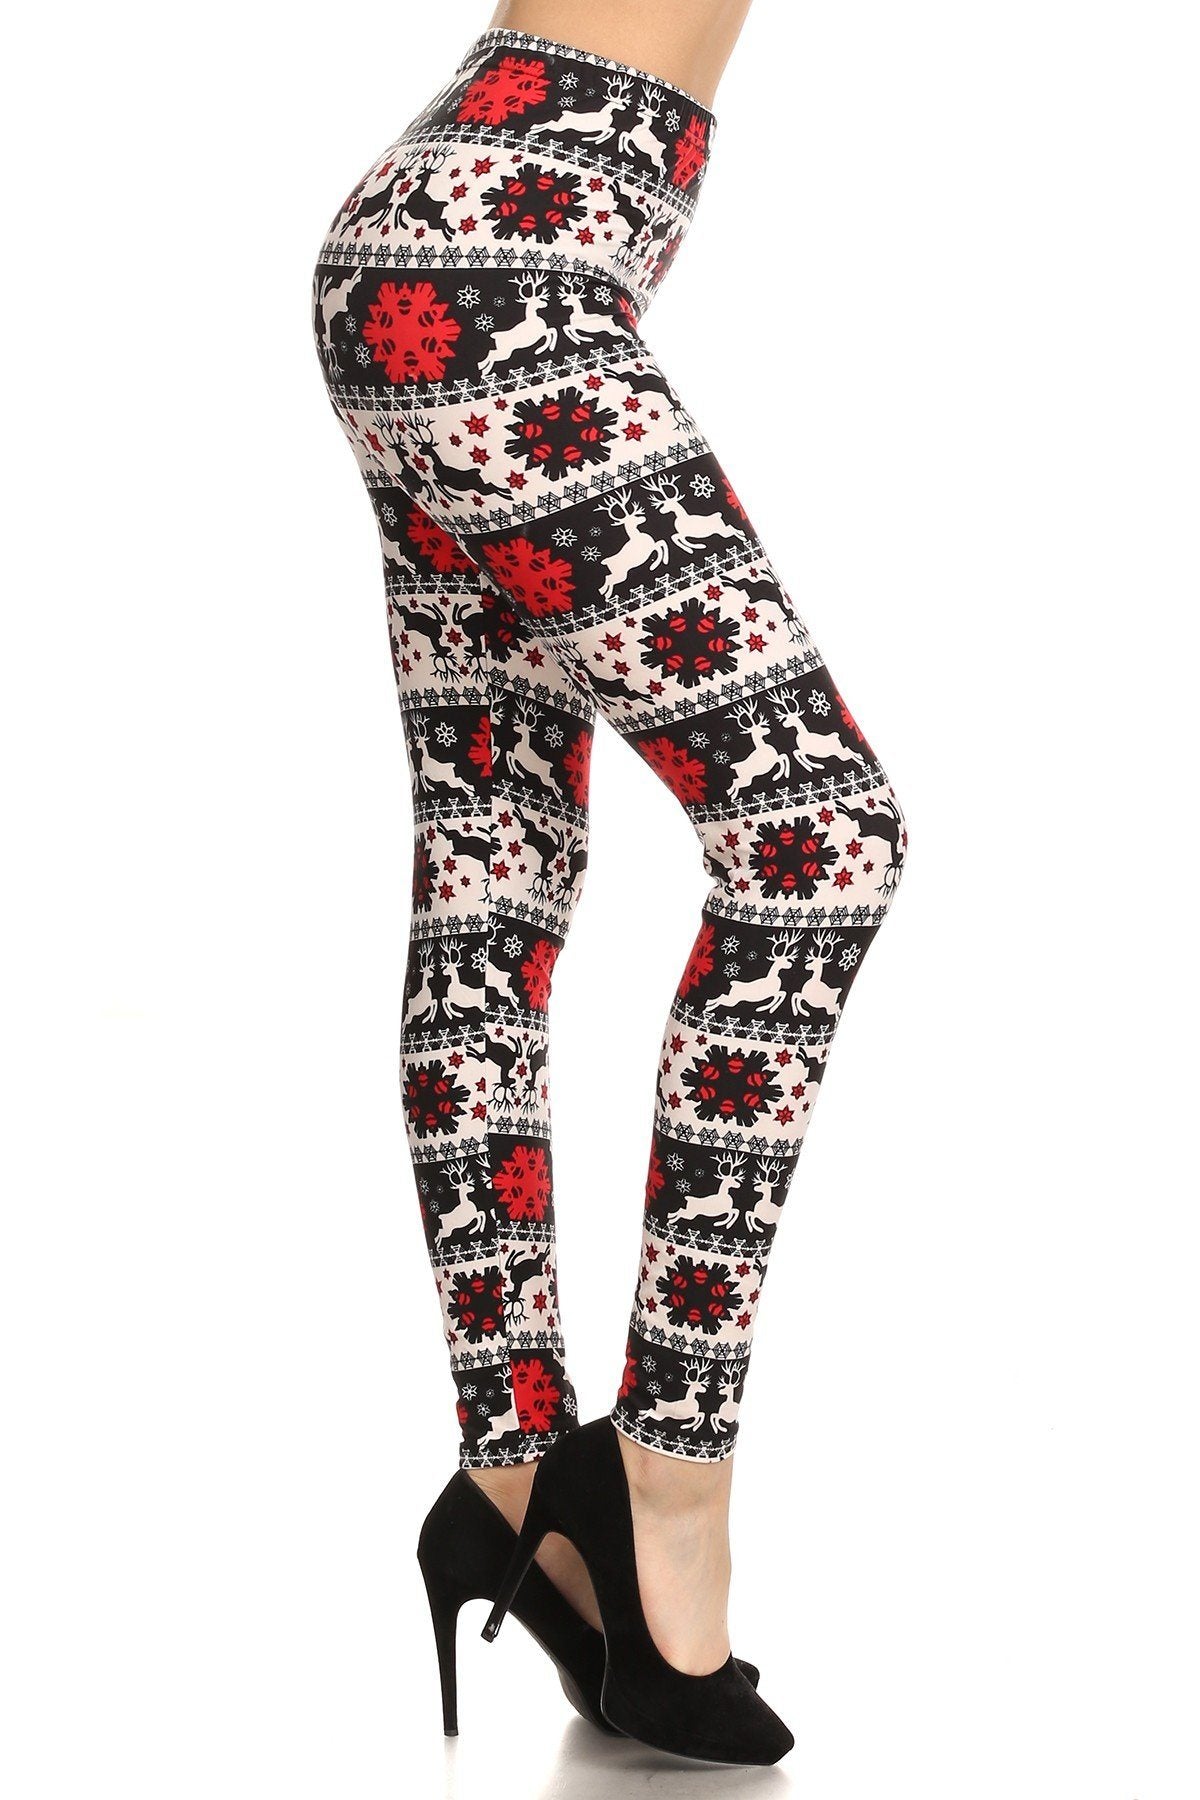 Women and Girls Christmas Leggings | Exclusive Fashions – MomMe and More